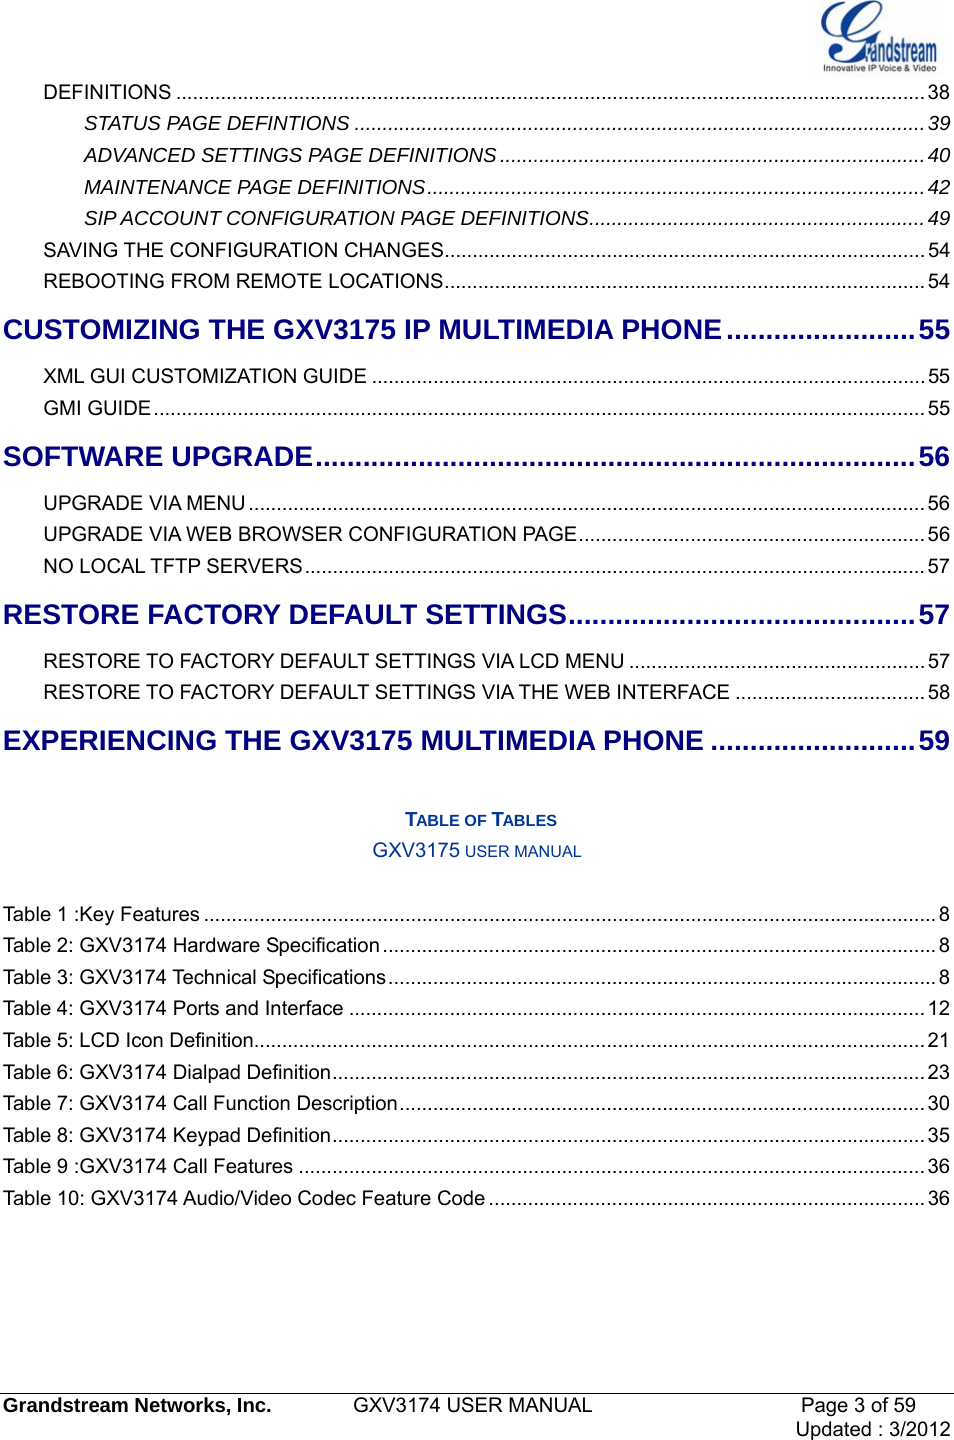   Grandstream Networks, Inc.        GXV3174 USER MANUAL                     Page 3 of 59                                 Updated : 3/2012  DEFINITIONS ...................................................................................................................................... 38STATUS PAGE DEFINTIONS ......................................................................................................39ADVANCED SETTINGS PAGE DEFINITIONS ............................................................................40MAINTENANCE PAGE DEFINITIONS.........................................................................................42SIP ACCOUNT CONFIGURATION PAGE DEFINITIONS............................................................49SAVING THE CONFIGURATION CHANGES......................................................................................54REBOOTING FROM REMOTE LOCATIONS......................................................................................54CUSTOMIZING THE GXV3175 IP MULTIMEDIA PHONE........................55 XML GUI CUSTOMIZATION GUIDE ...................................................................................................55 GMI GUIDE..........................................................................................................................................55 SOFTWARE UPGRADE............................................................................56UPGRADE VIA MENU ......................................................................................................................... 56UPGRADE VIA WEB BROWSER CONFIGURATION PAGE..............................................................56NO LOCAL TFTP SERVERS............................................................................................................... 57RESTORE FACTORY DEFAULT SETTINGS............................................57RESTORE TO FACTORY DEFAULT SETTINGS VIA LCD MENU .....................................................57RESTORE TO FACTORY DEFAULT SETTINGS VIA THE WEB INTERFACE ..................................58EXPERIENCING THE GXV3175 MULTIMEDIA PHONE ..........................59  TABLE OF TABLES GXV3175 USER MANUAL  Table 1 :Key Features ................................................................................................................................... 8Table 2: GXV3174 Hardware Specification................................................................................................... 8Table 3: GXV3174 Technical Specifications.................................................................................................. 8Table 4: GXV3174 Ports and Interface ....................................................................................................... 12Table 5: LCD Icon Definition........................................................................................................................ 21Table 6: GXV3174 Dialpad Definition.......................................................................................................... 23Table 7: GXV3174 Call Function Description.............................................................................................. 30 Table 8: GXV3174 Keypad Definition.......................................................................................................... 35Table 9 :GXV3174 Call Features ................................................................................................................ 36Table 10: GXV3174 Audio/Video Codec Feature Code .............................................................................. 36     